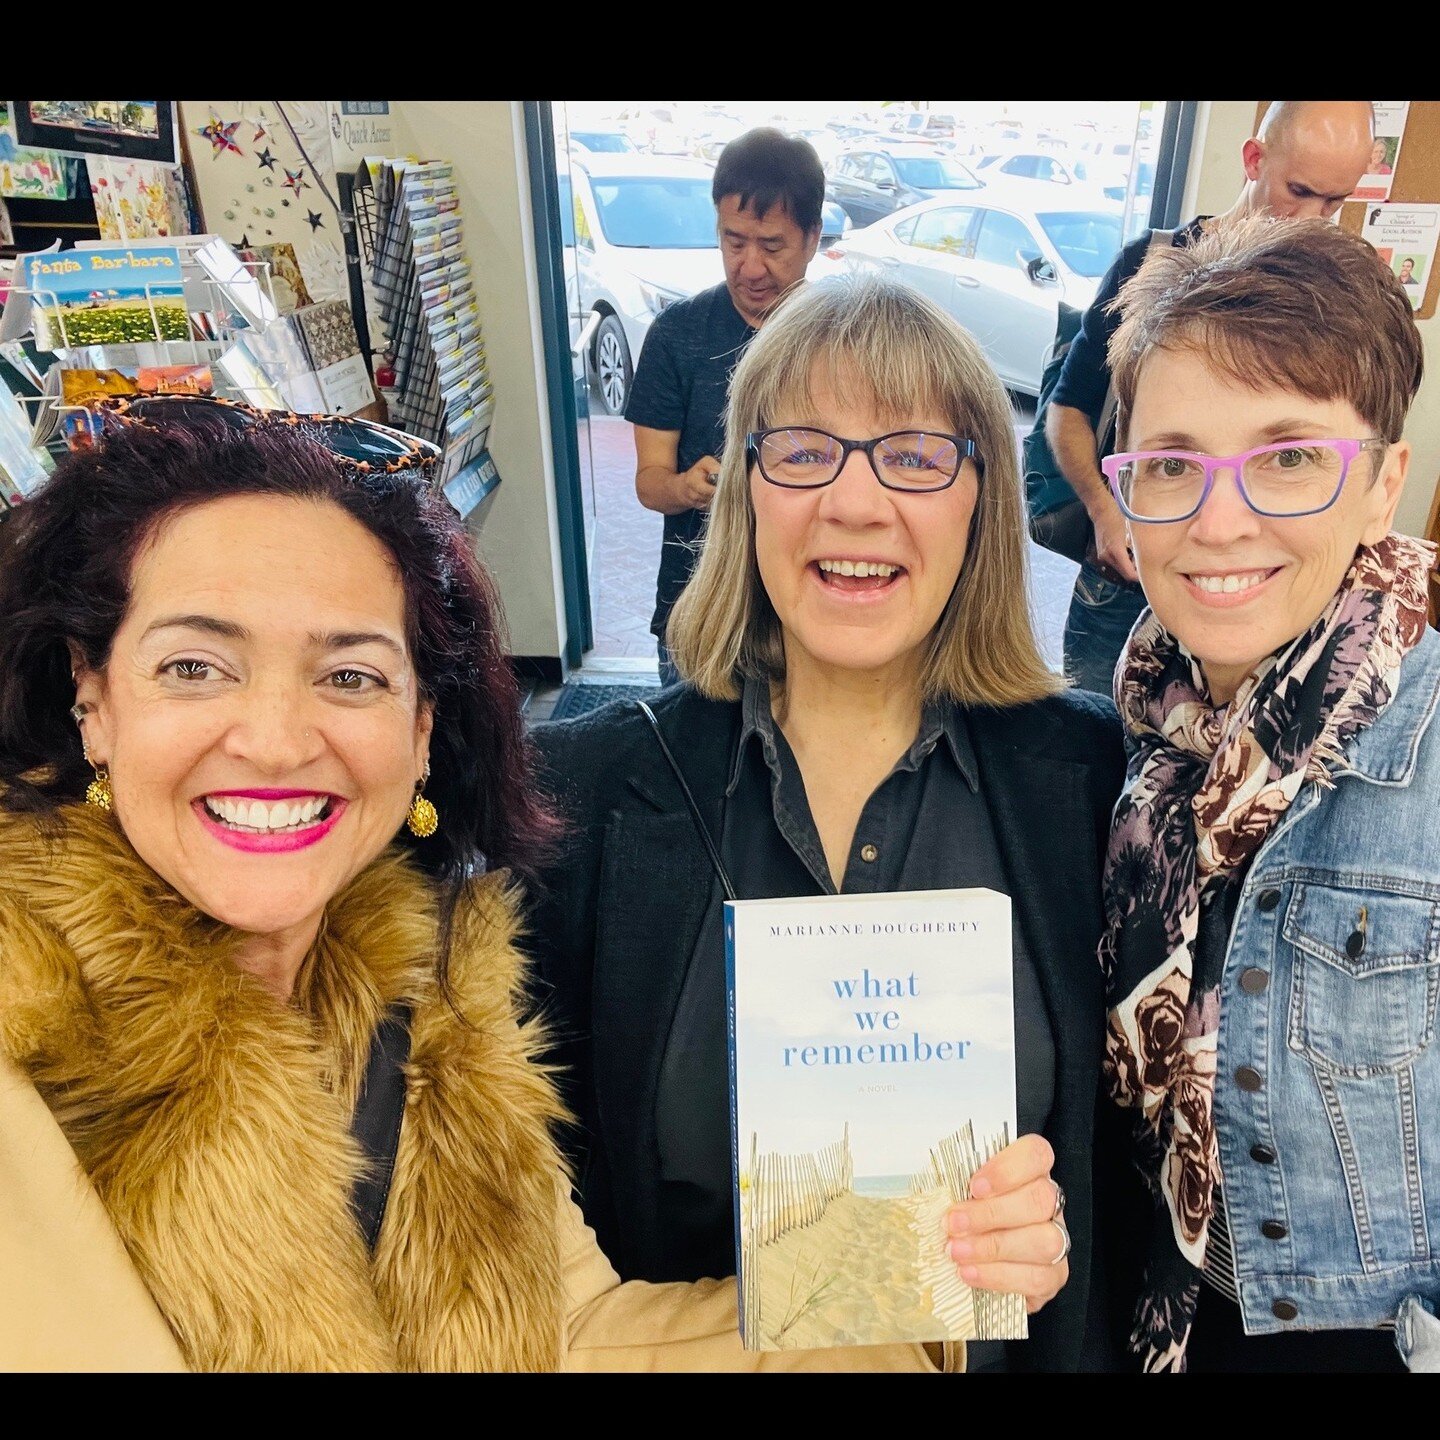 Rachel, Grace and Karen, SBWC word mavens, at a Chaucer&lsquo;s book signing for Marianne Dougherty&rsquo;s novel.